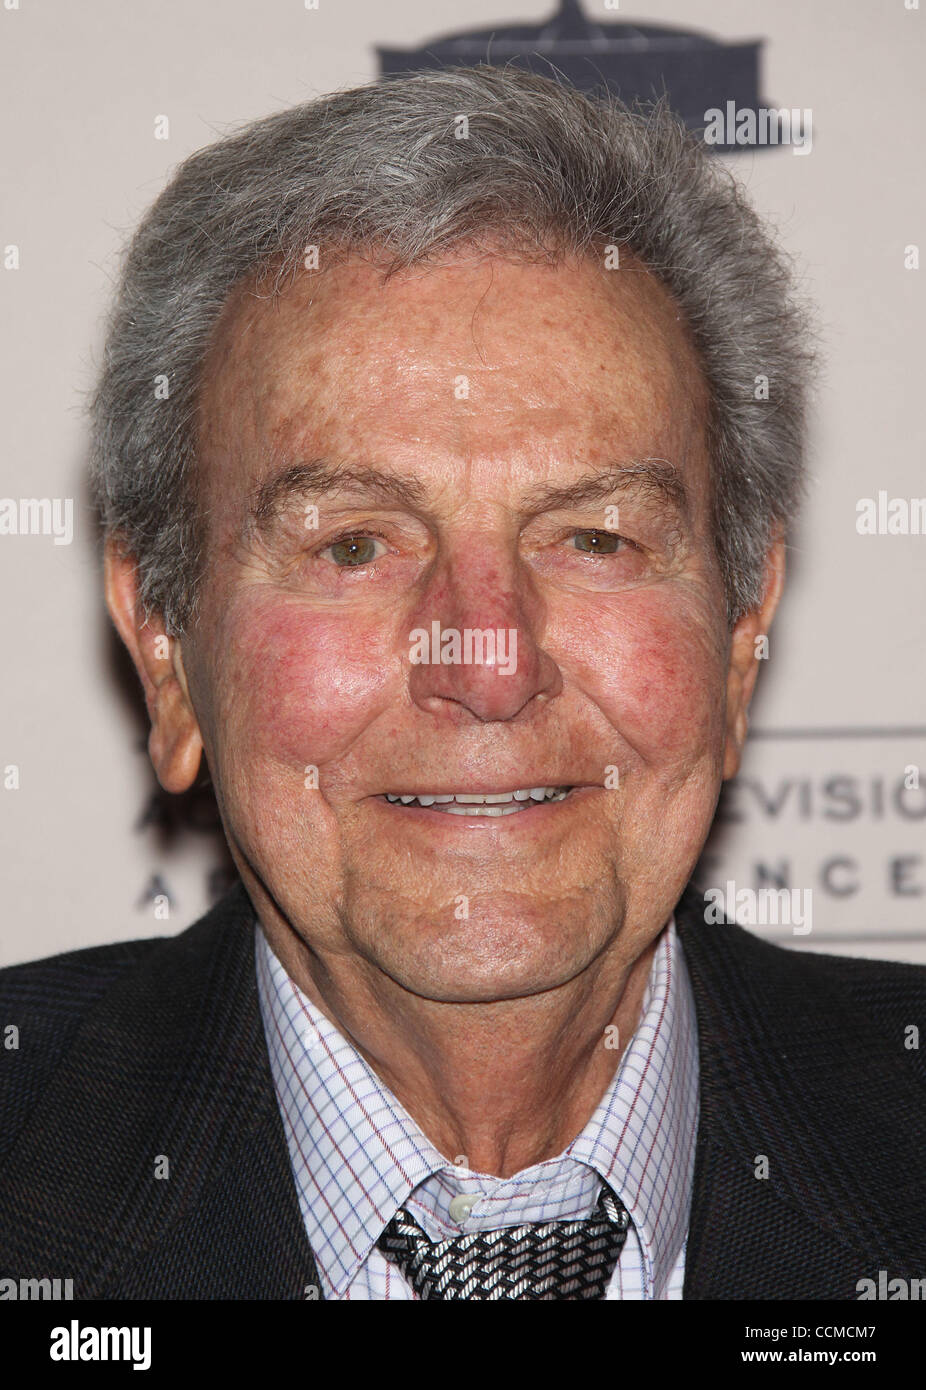 Nov 1, 2010 - North Hollywood, California, USA - Actor MIKE CONNORS ...